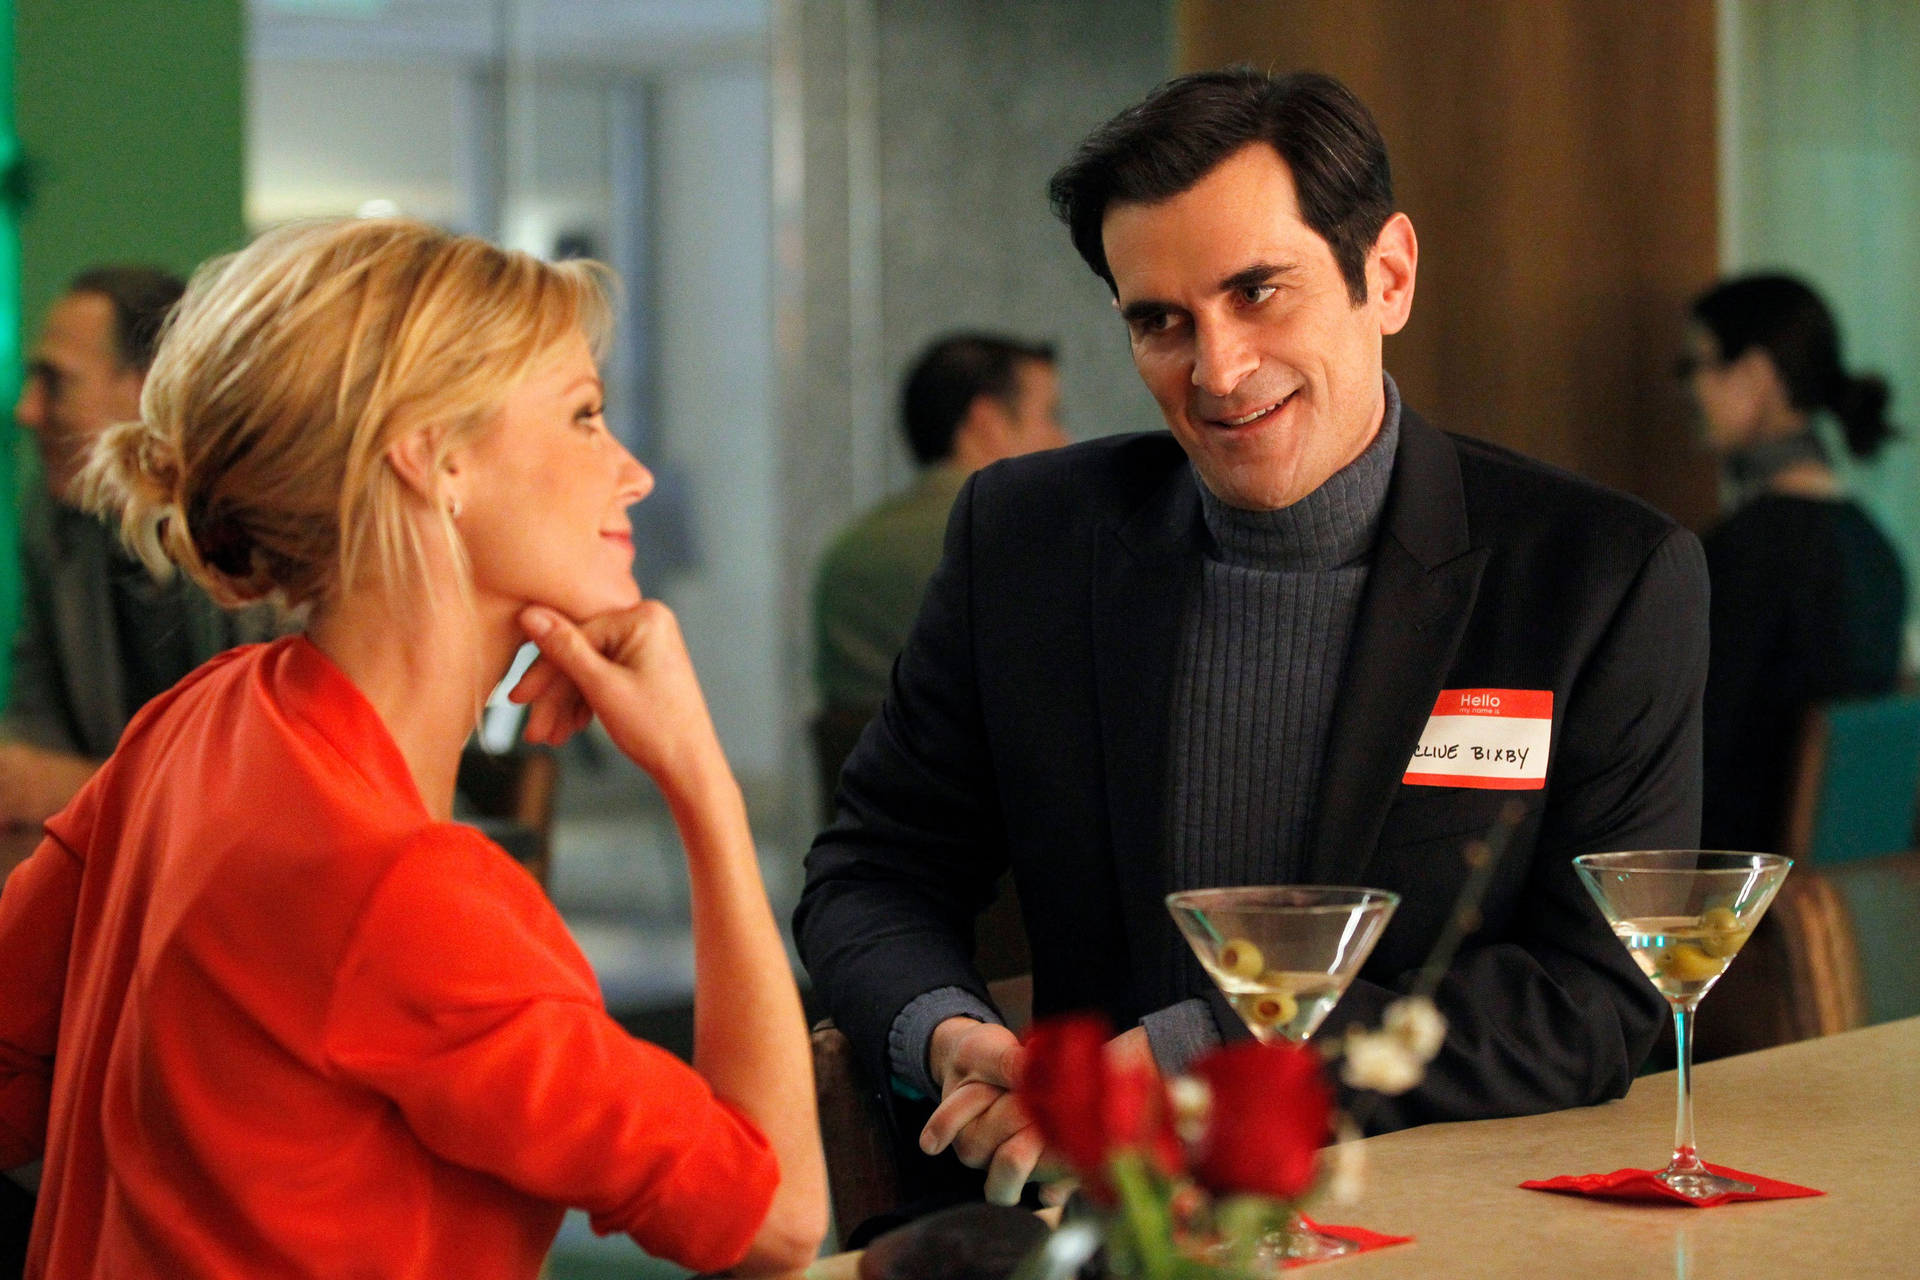 Meet Clive Bixby And Julianna, One Of Modern Family's Funniest Couplings Background